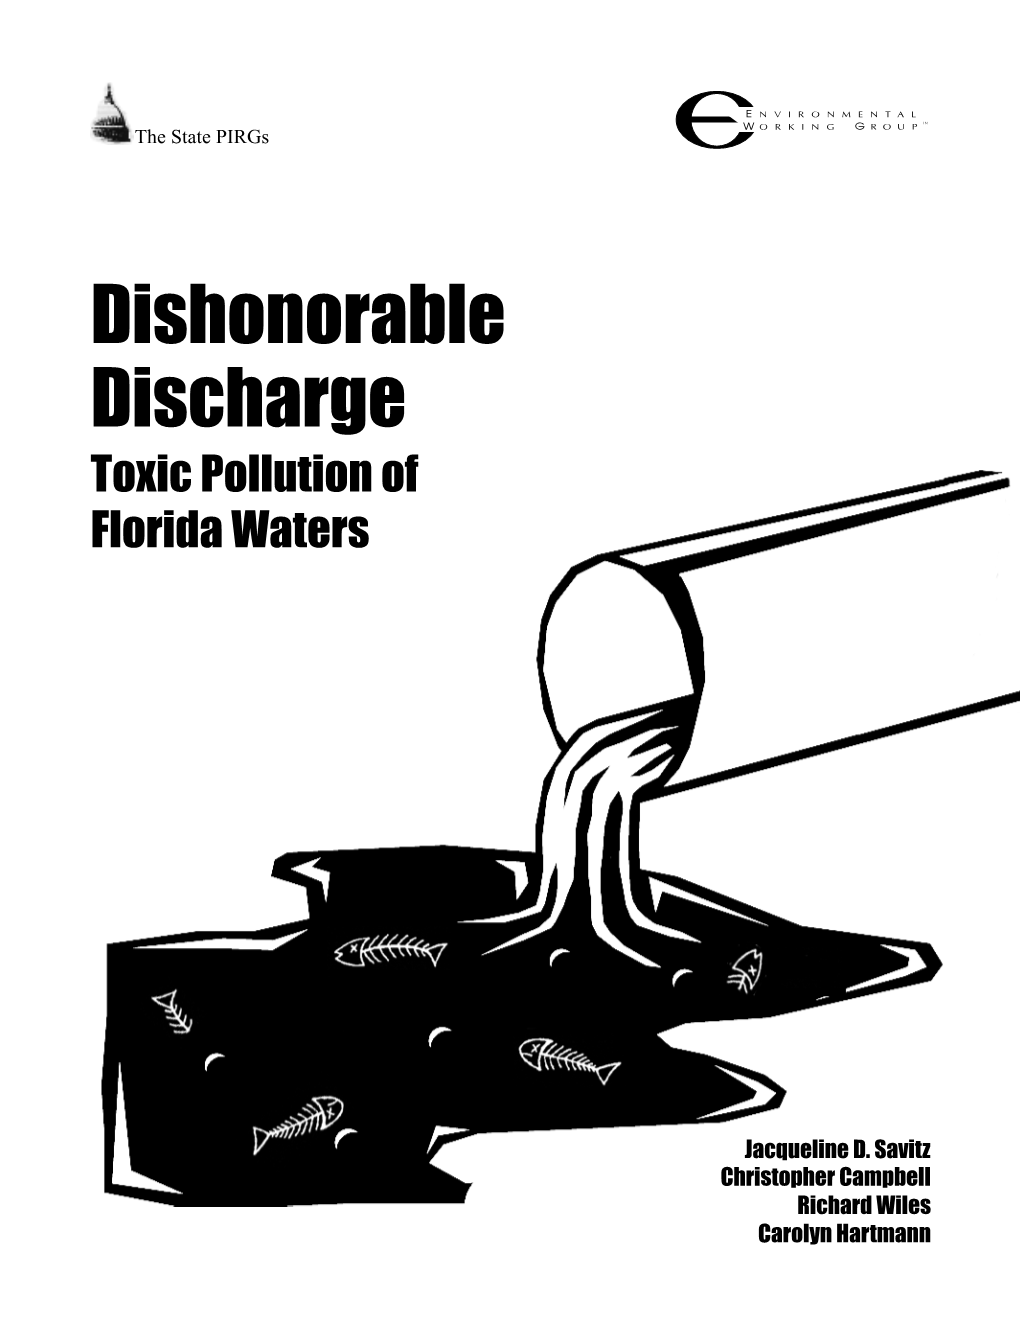 Dishonorable Discharge Toxic Pollution of Florida Waters